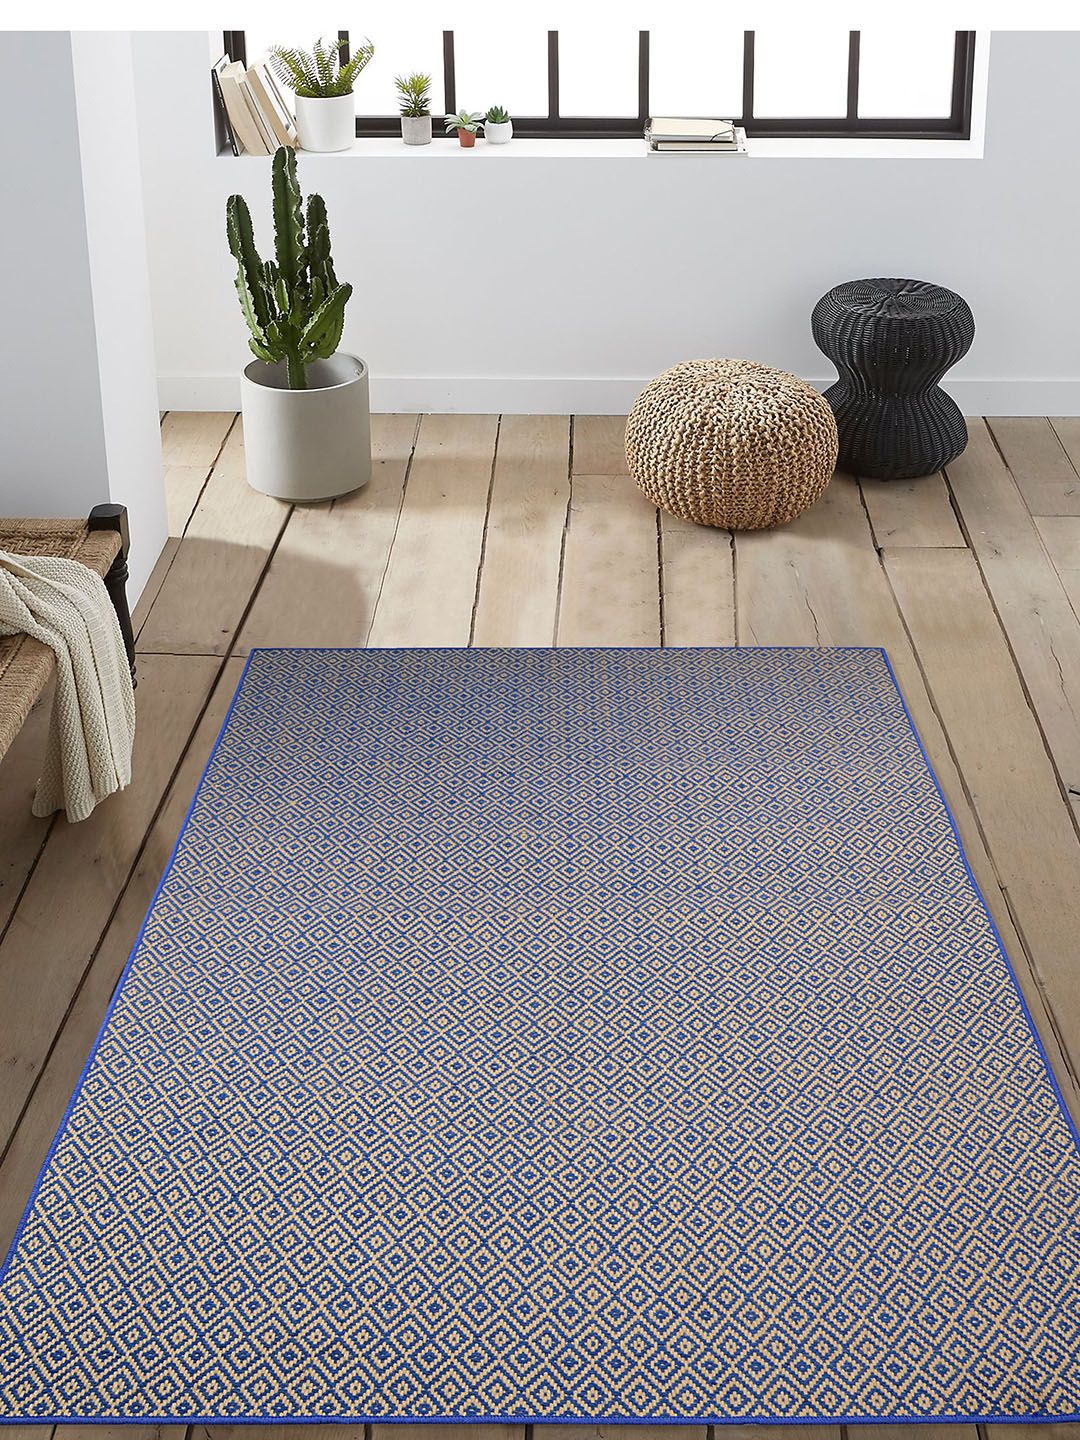 Saral Home Blue & Brown Woven Design Anti-Skid Carpet Price in India